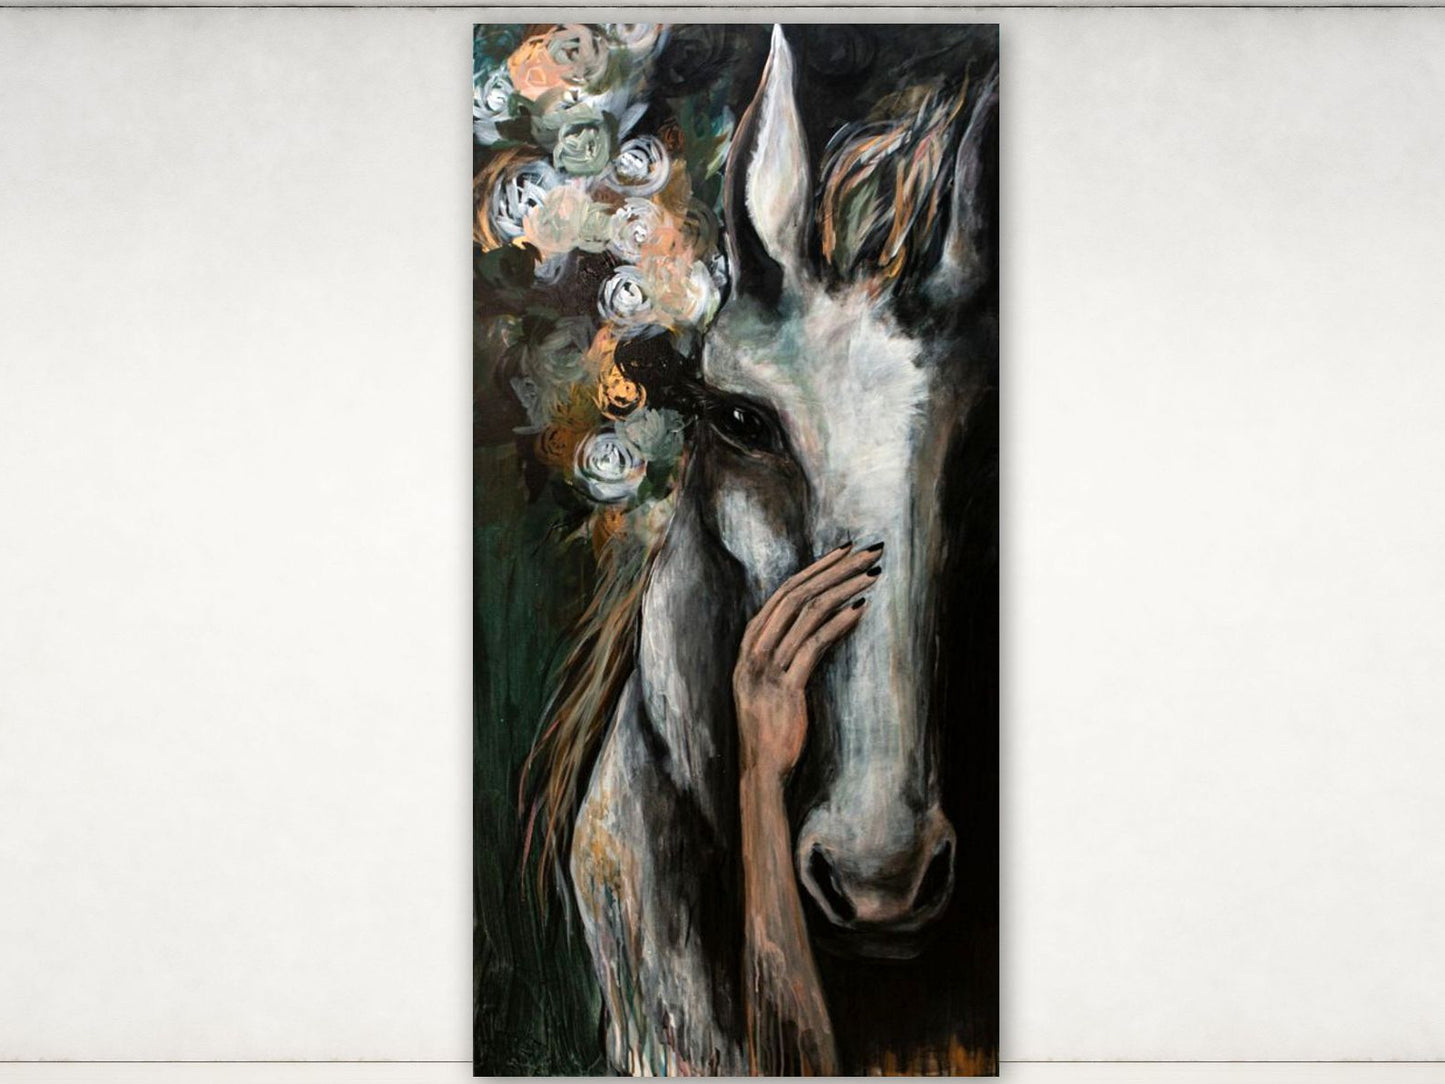 art gallery prints, fine art print of horse, painting of white horse, watercolor and acrylic art